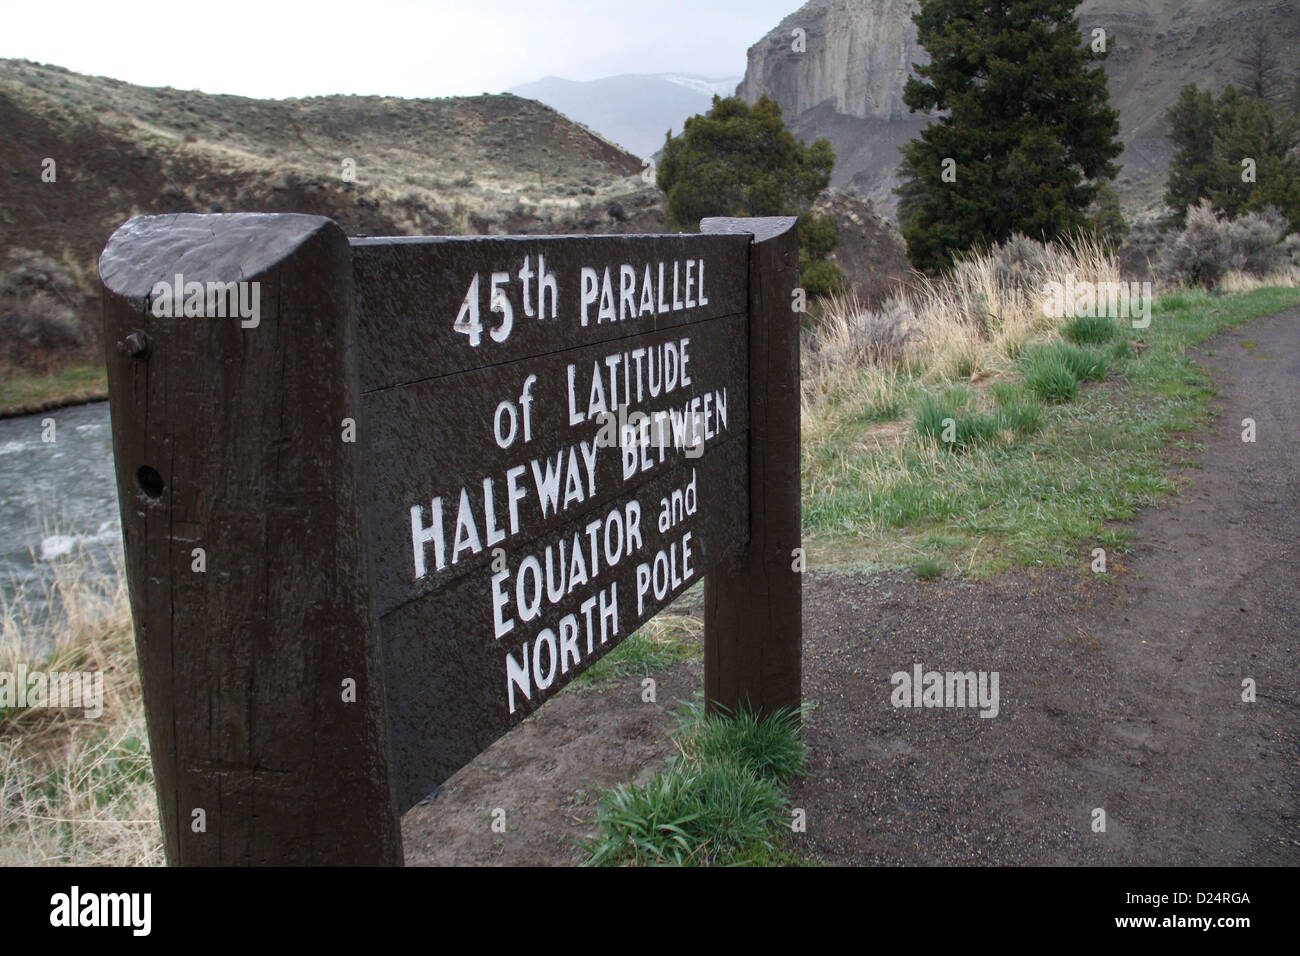 45th parallel sign Yellowstone National Park Wyoming Latitude halfway between equator and North Pole Stock Photo